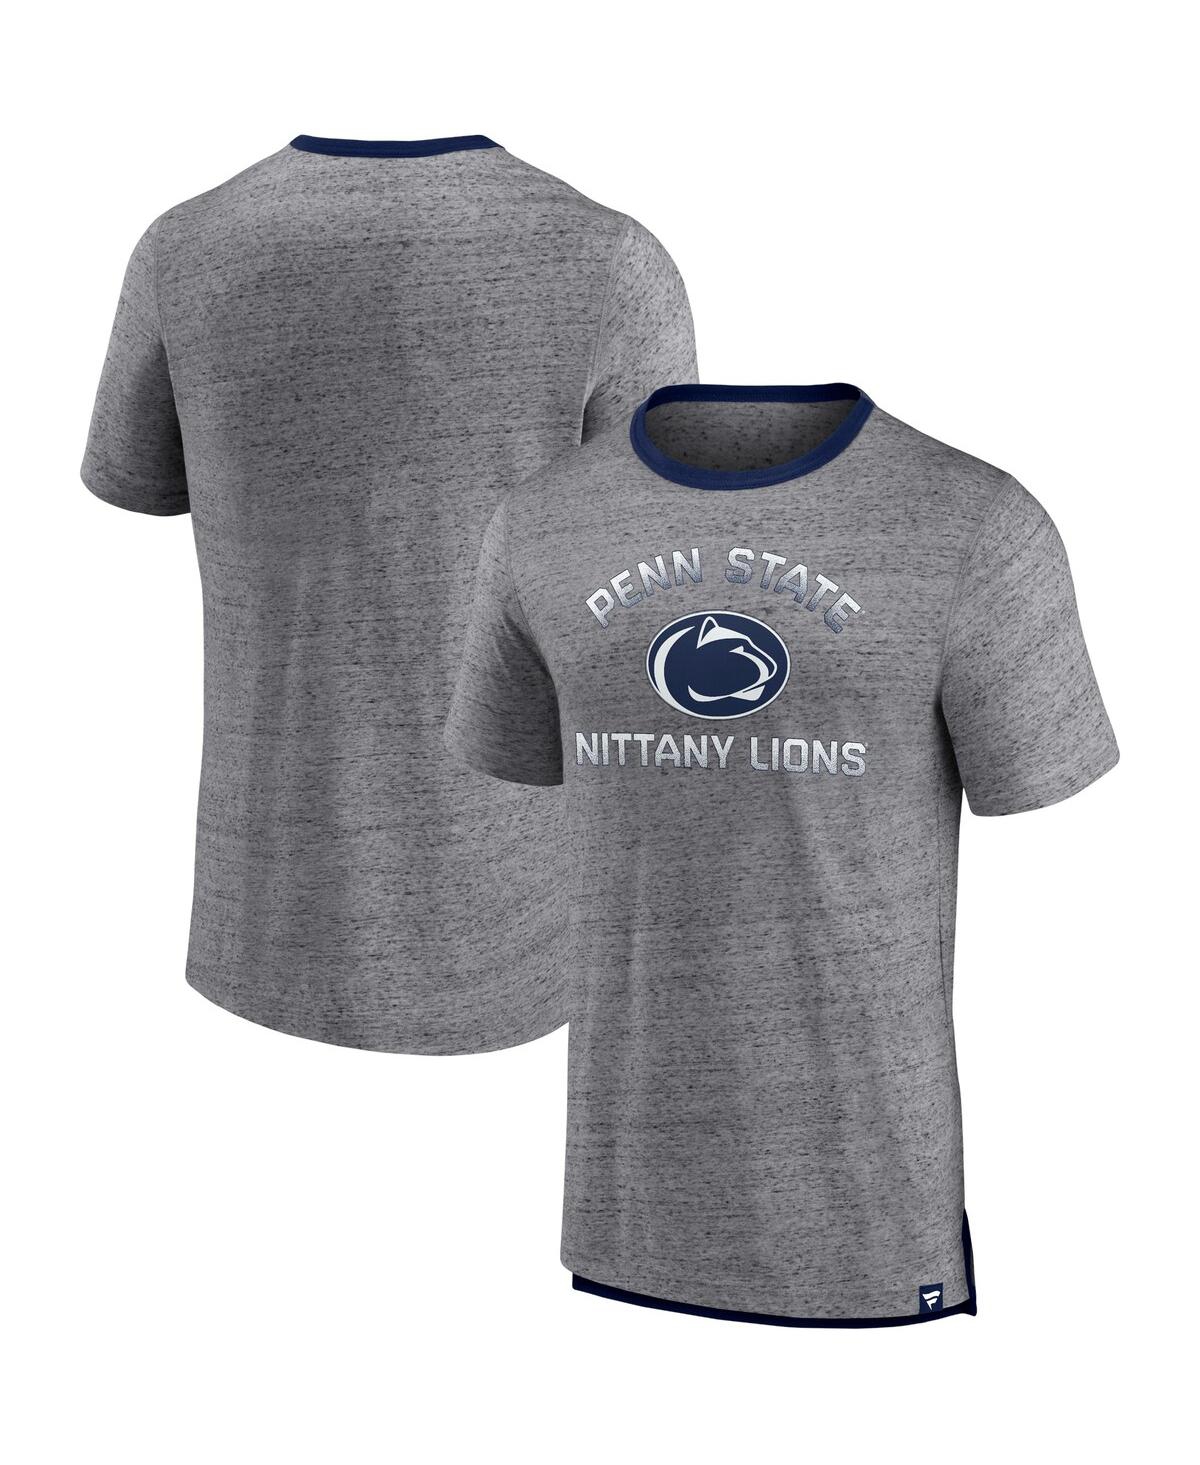 Fanatics Men's  Heathered Gray Penn State Nittany Lions Personal Record T-shirt